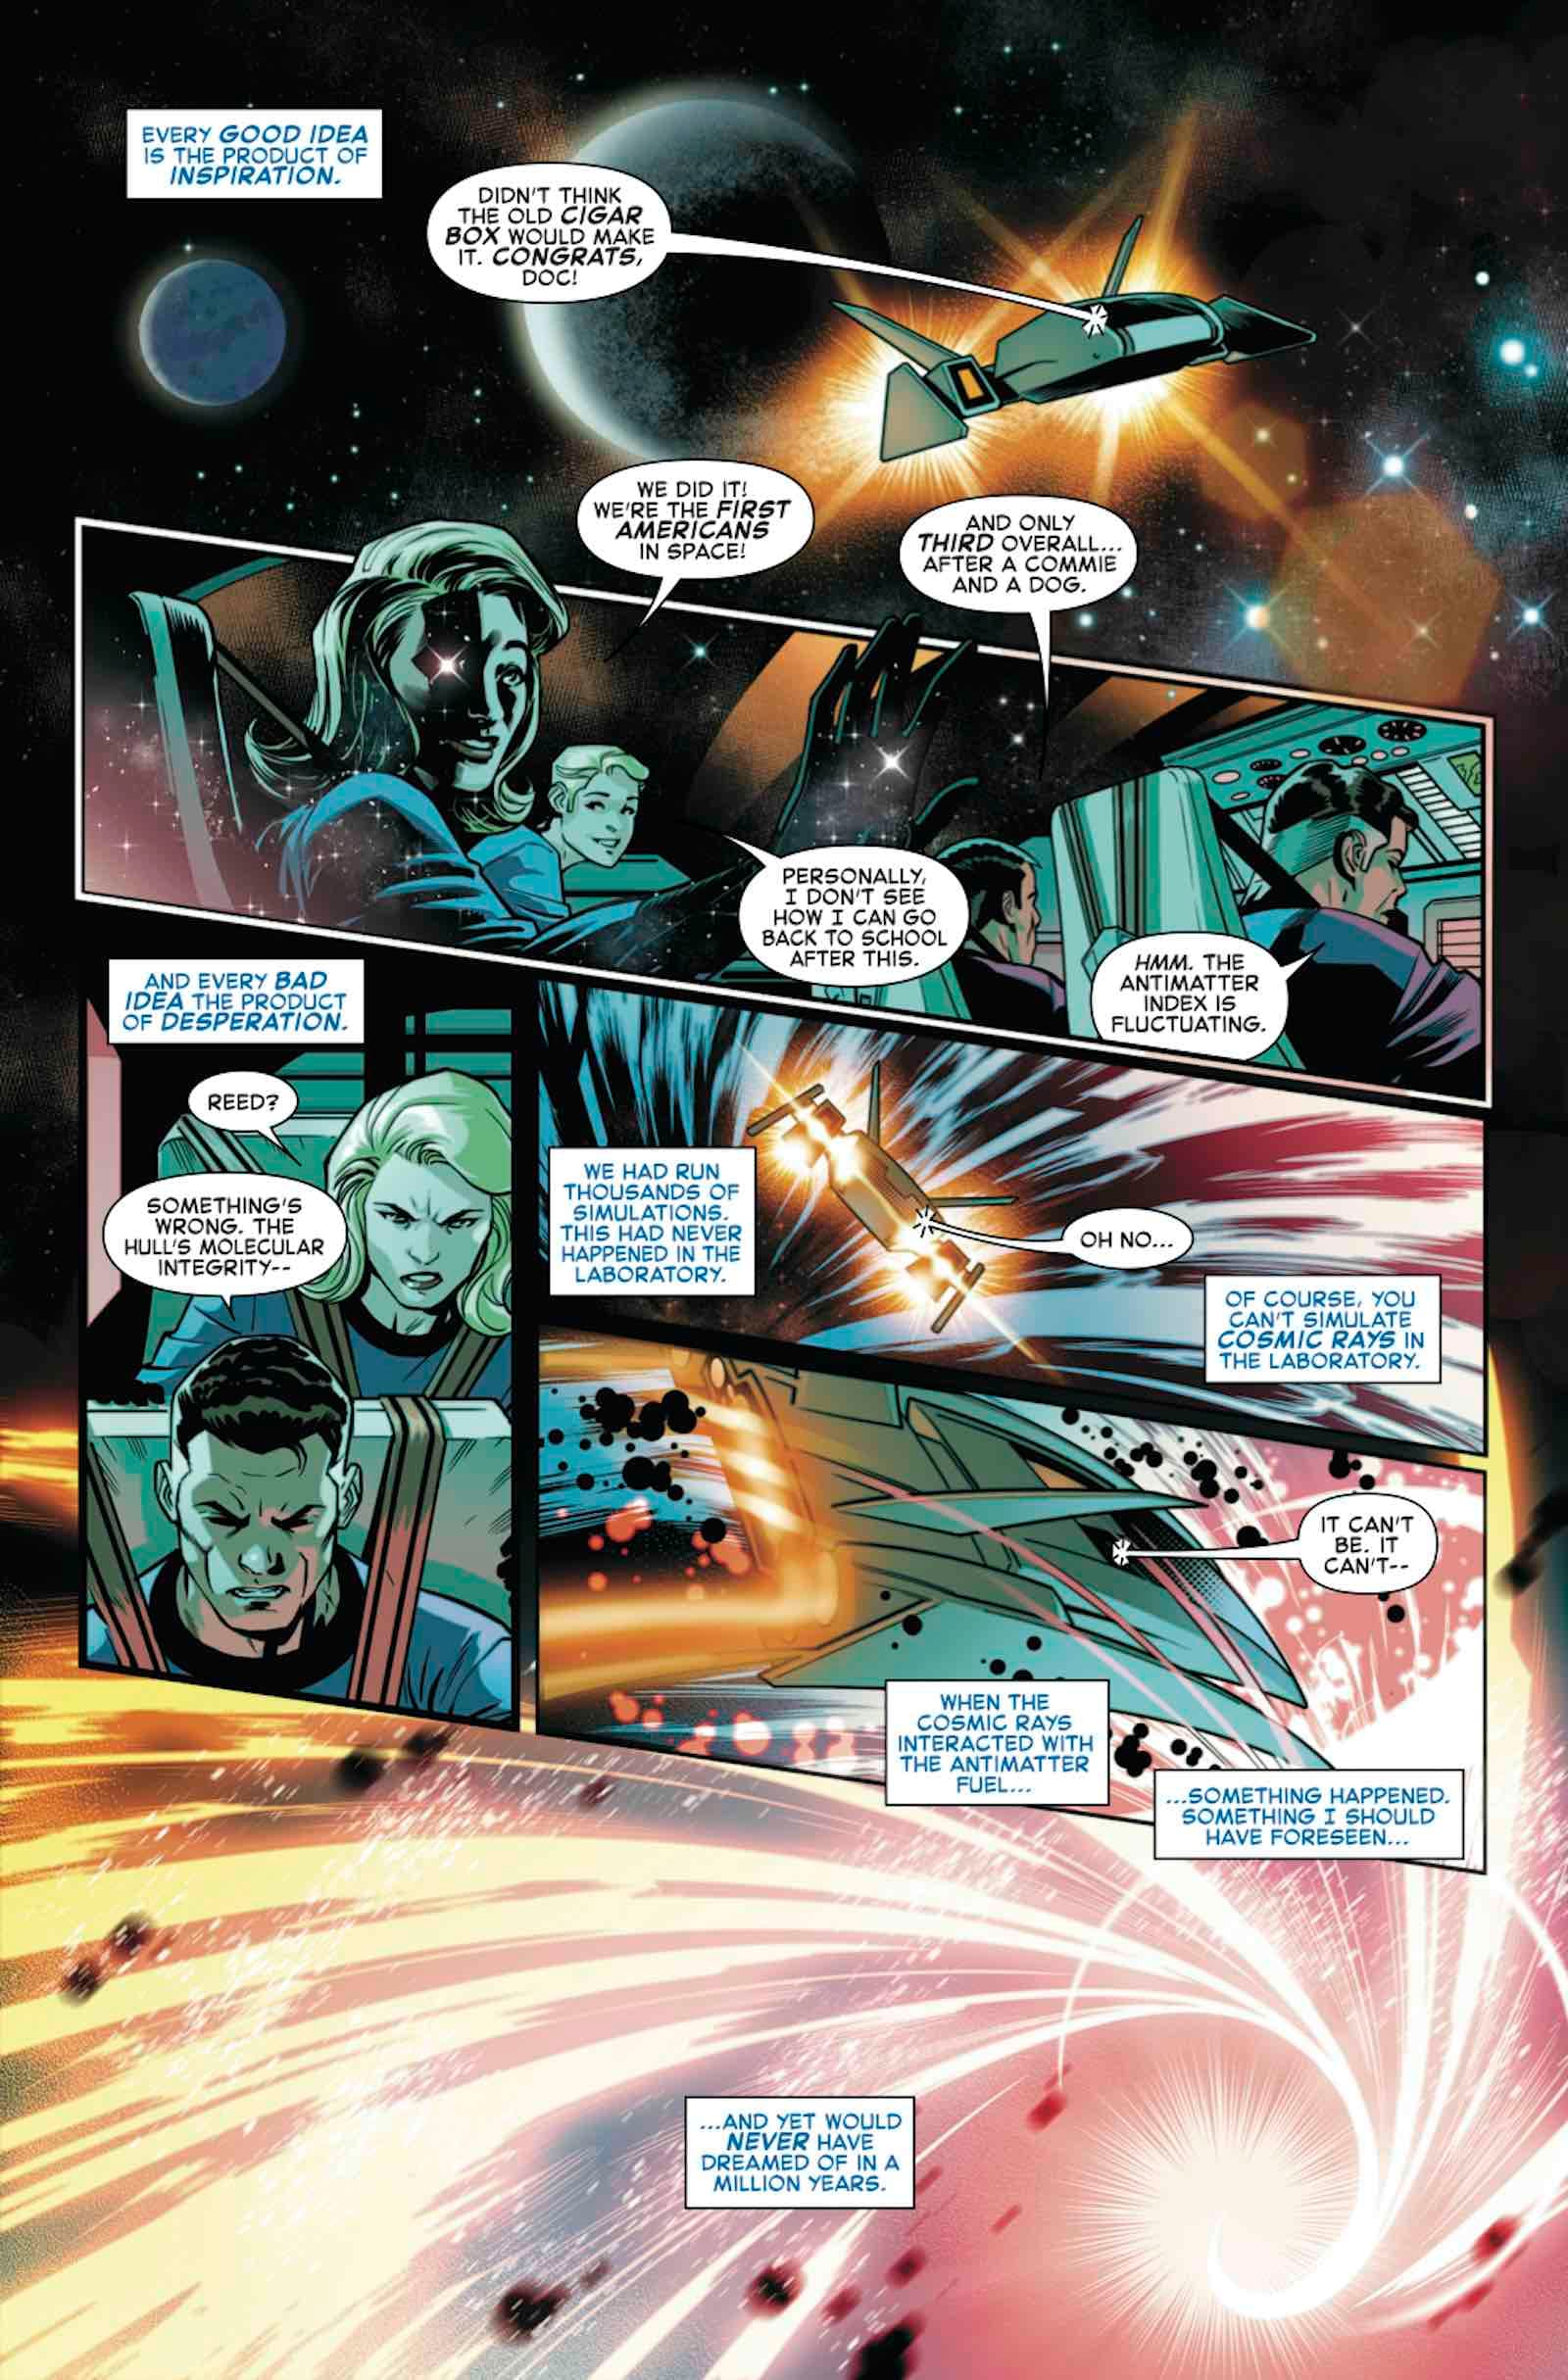 Read the Opening Pages of 'Fantastic Four: Life Story' #1 | Marvel